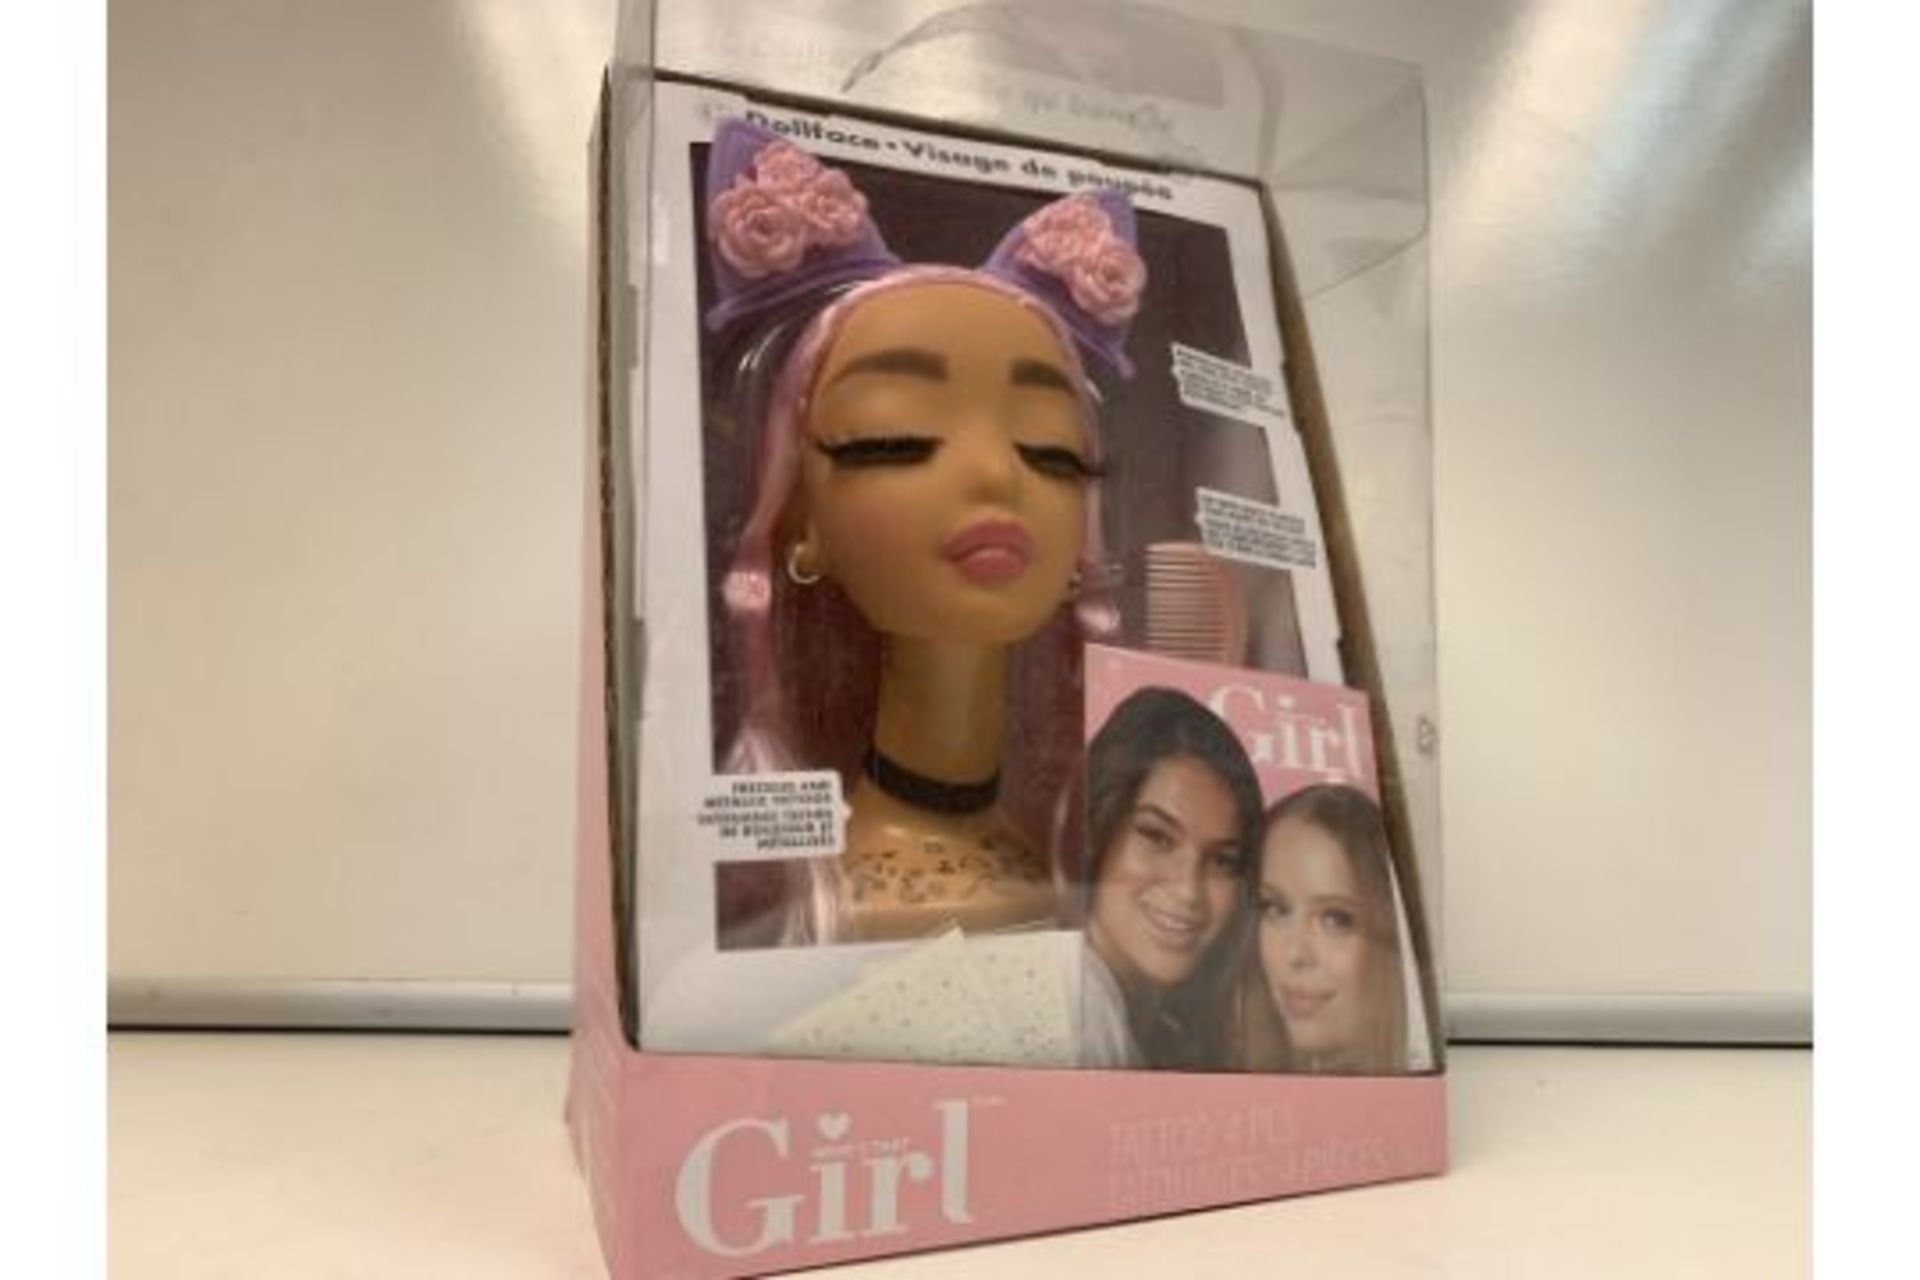 8 X NEW BOXED WHO'S THE GIRL - LARGE DOLL FACE. PRACTICE NEW STYLES, TRY NEW LOOKS - INCLUDES